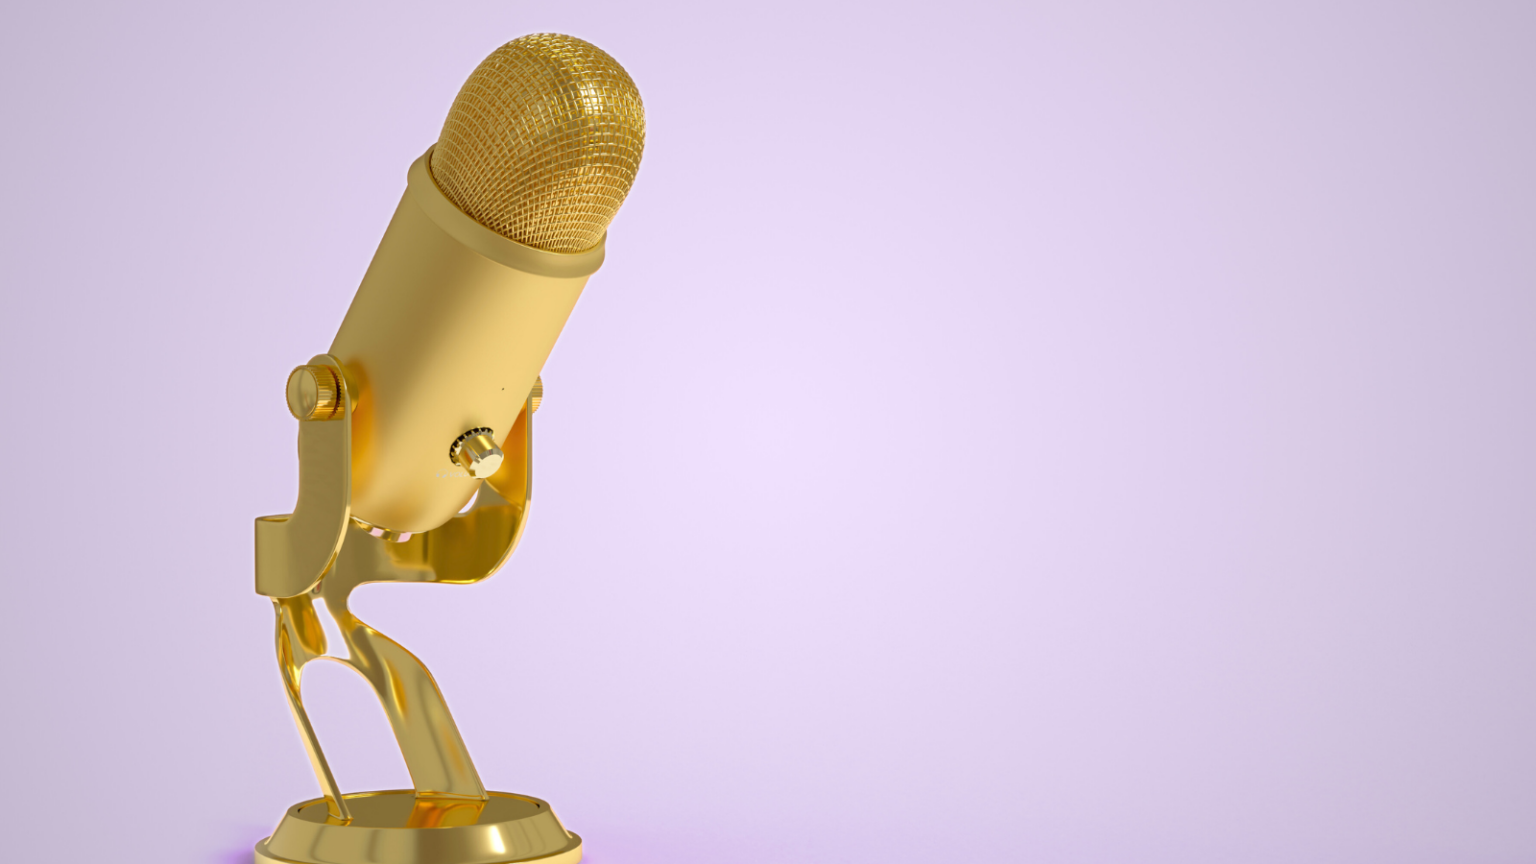 Photo of a gold microphone